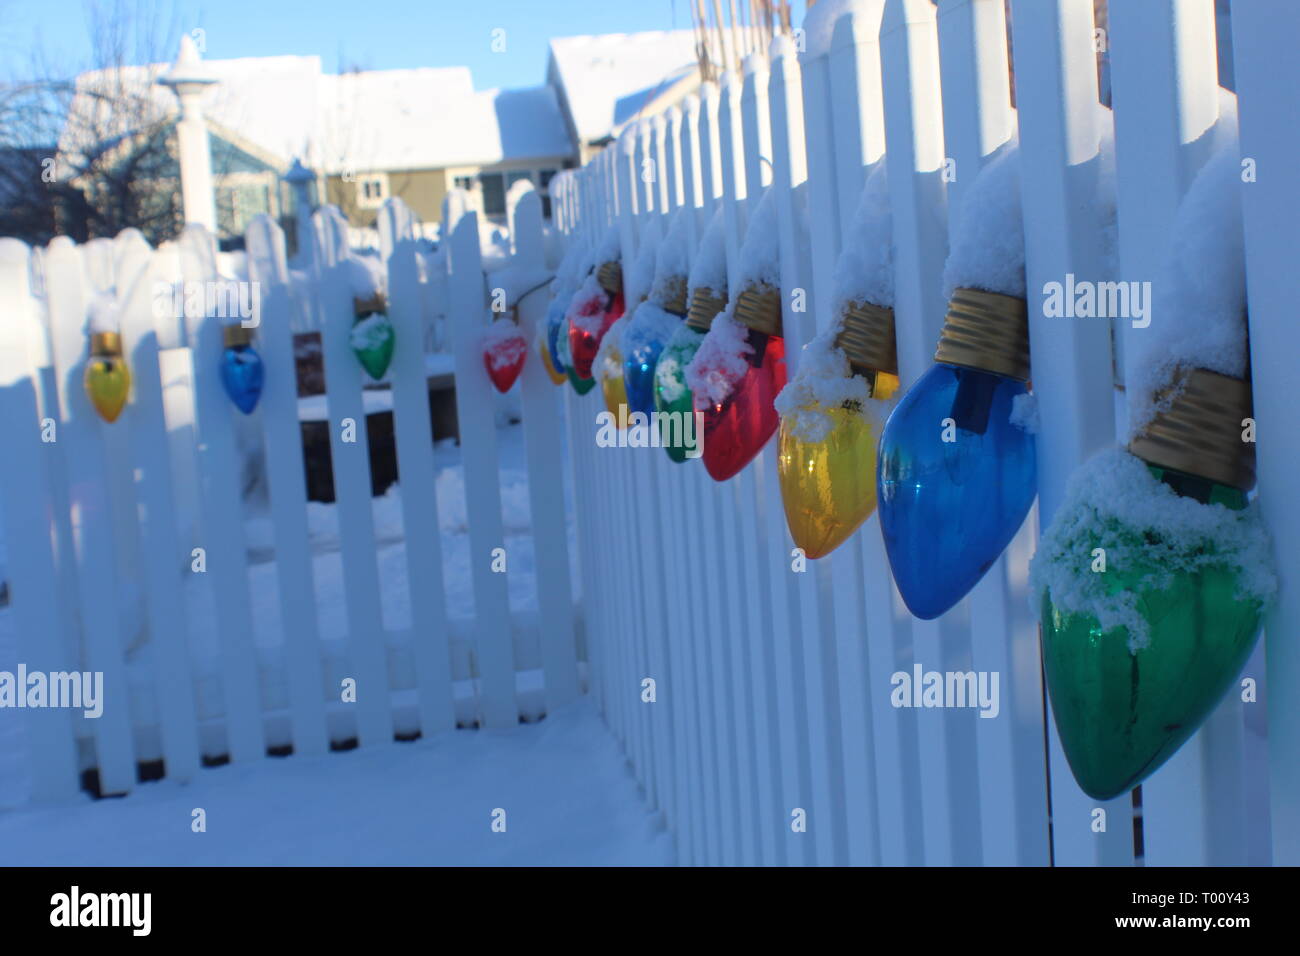 Christmas lights strung along white picket fence in the snow Stock Photo